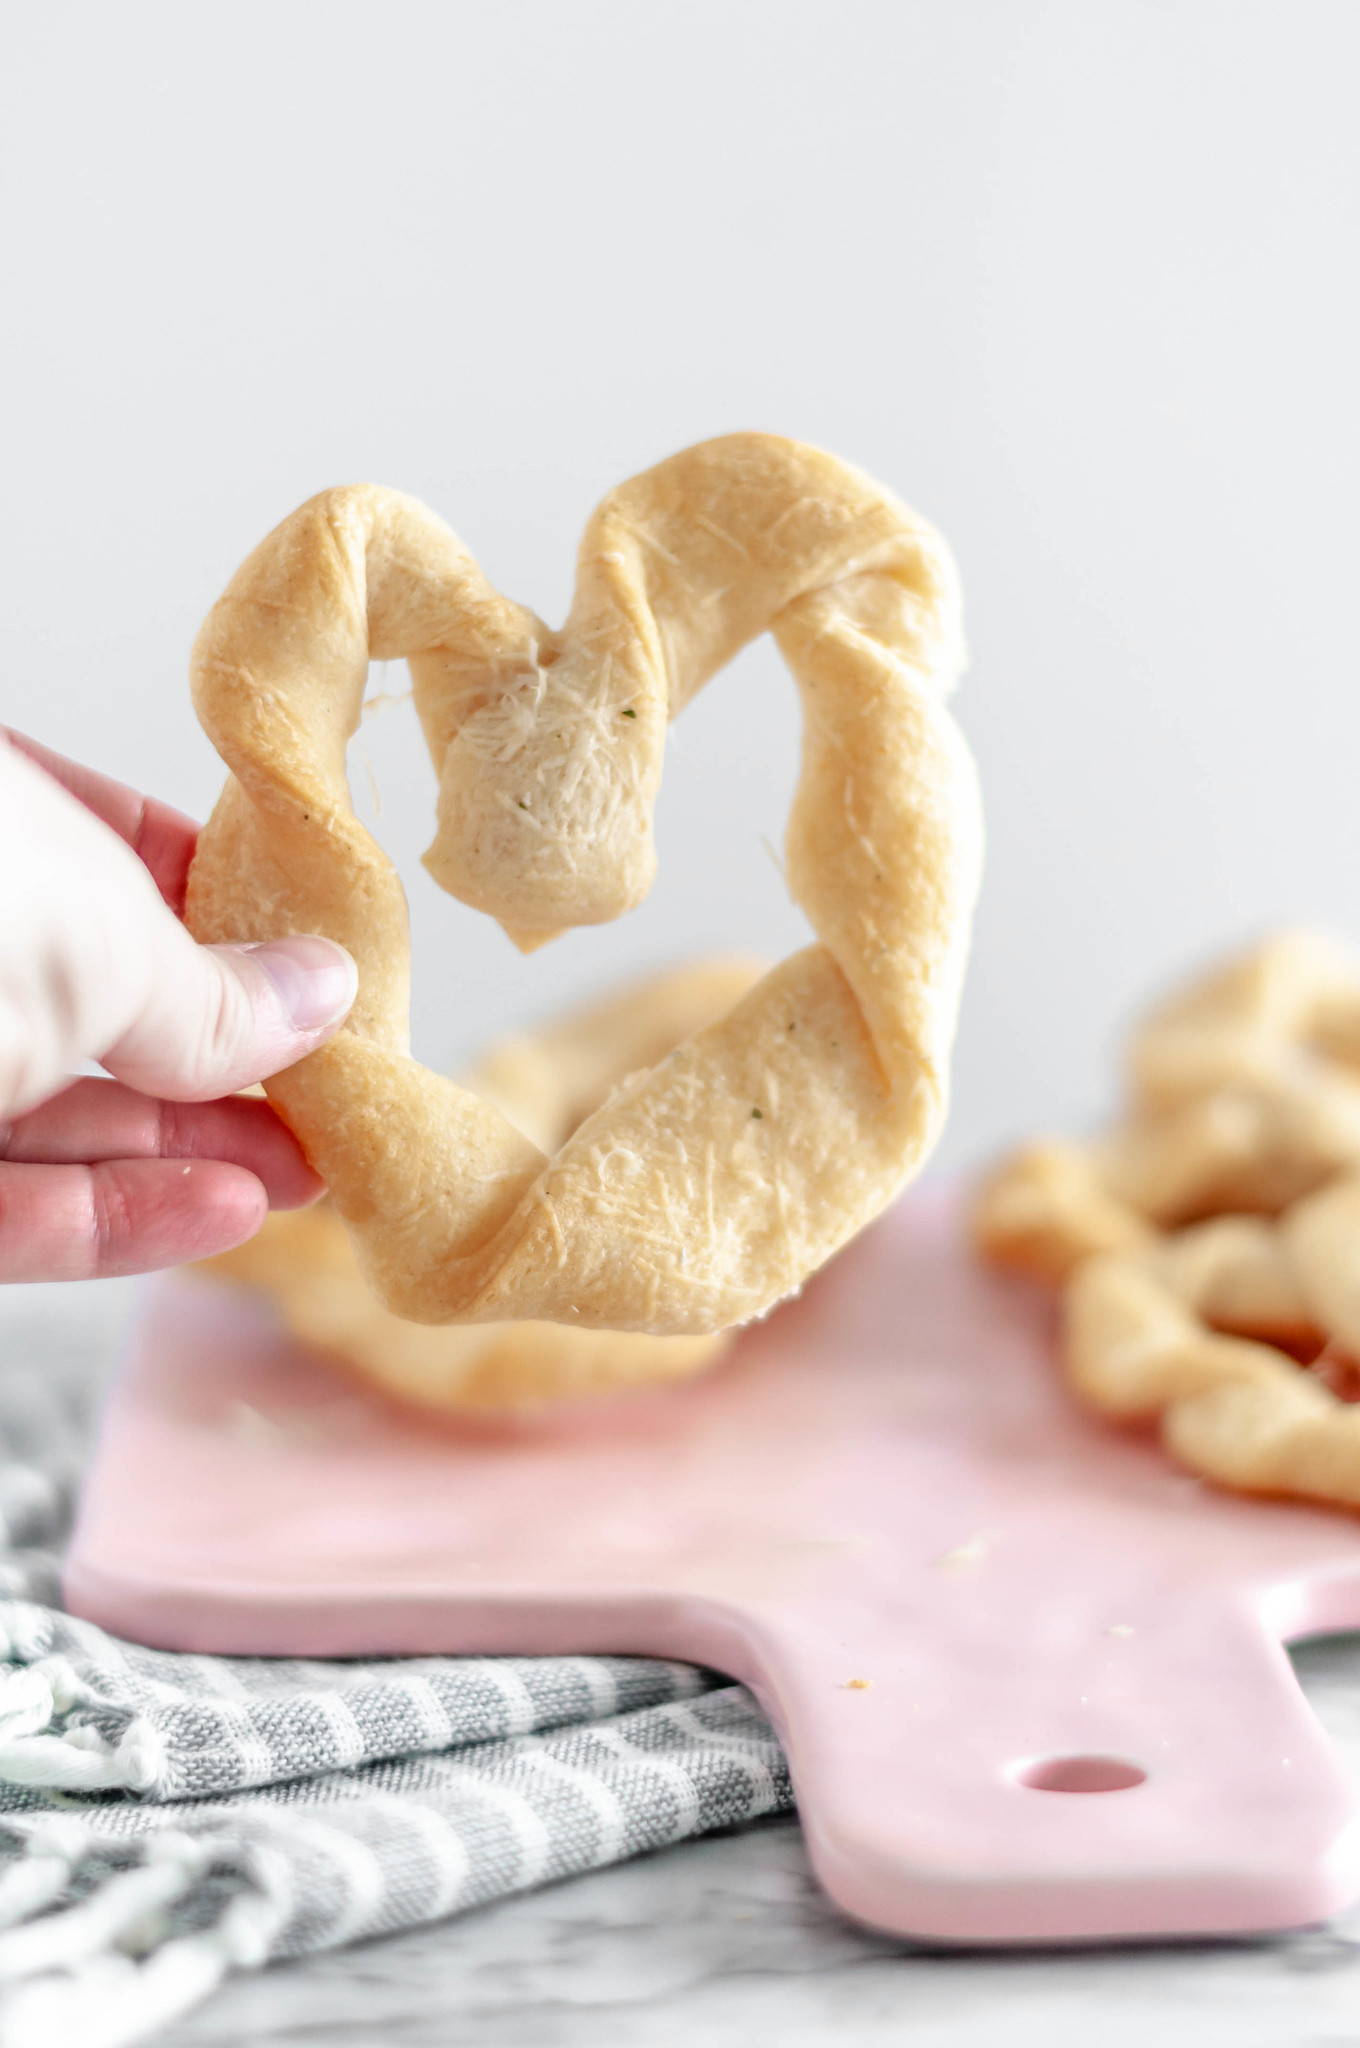 Heart Shaped Breadsticks are a simple way to add some festive flair to Valentines. Store-bought crescent dough & a few simple ingredients are all you need.